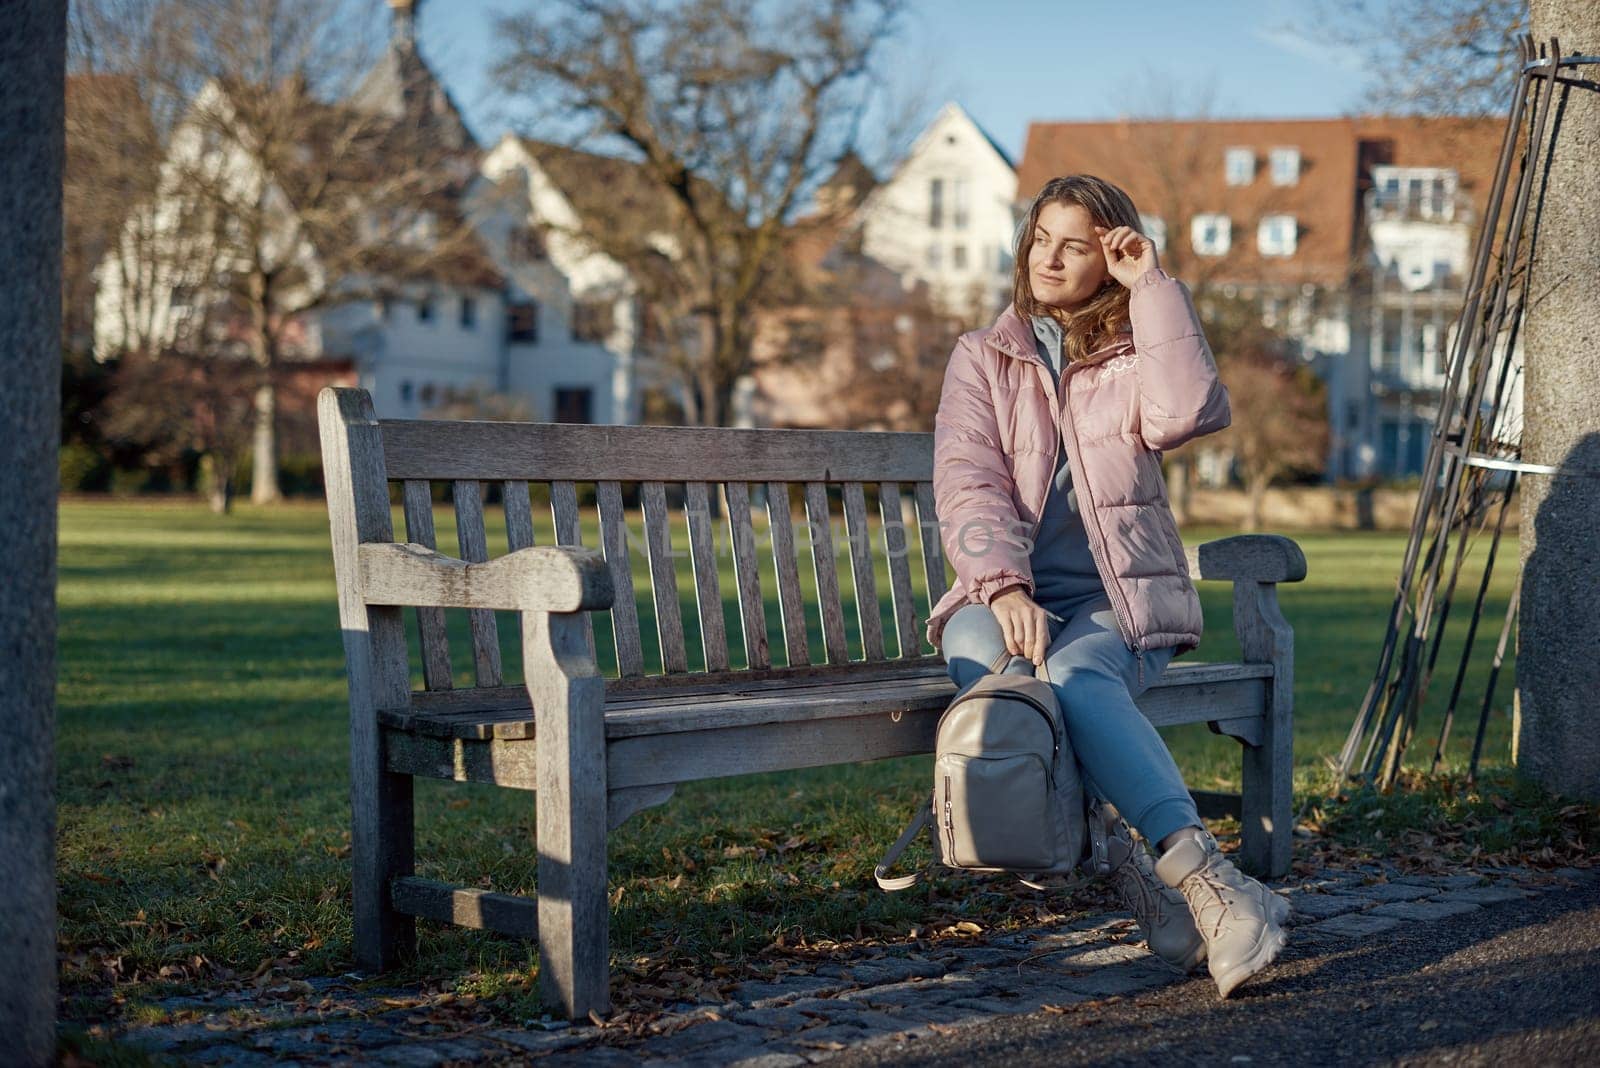 Experience the festive spirit of winter with this delightful image capturing a beautiful girl in a pink winter jacket sitting on a bench in a park, set against the backdrop of the historic town of Bitigheim-Bissingen, Baden-Wurttemberg, Germany. The scene features charming half-timbered houses, creating a picturesque blend of seasonal beauty and architectural charm. Winter Wonderland Elegance: Beautiful Girl in Pink Jacket Enjoys Festive Atmosphere in Bitigheim-Bissingen Park. Experience the magic of the holiday season as a charming girl in a pink winter jacket sits on a bench in a park against the backdrop of the historic town of Bitigheim-Bissingen, Baden-Wurttemberg, Germany. The scene is adorned with picturesque half-timbered houses, creating a delightful blend of winter charm and architectural beauty.